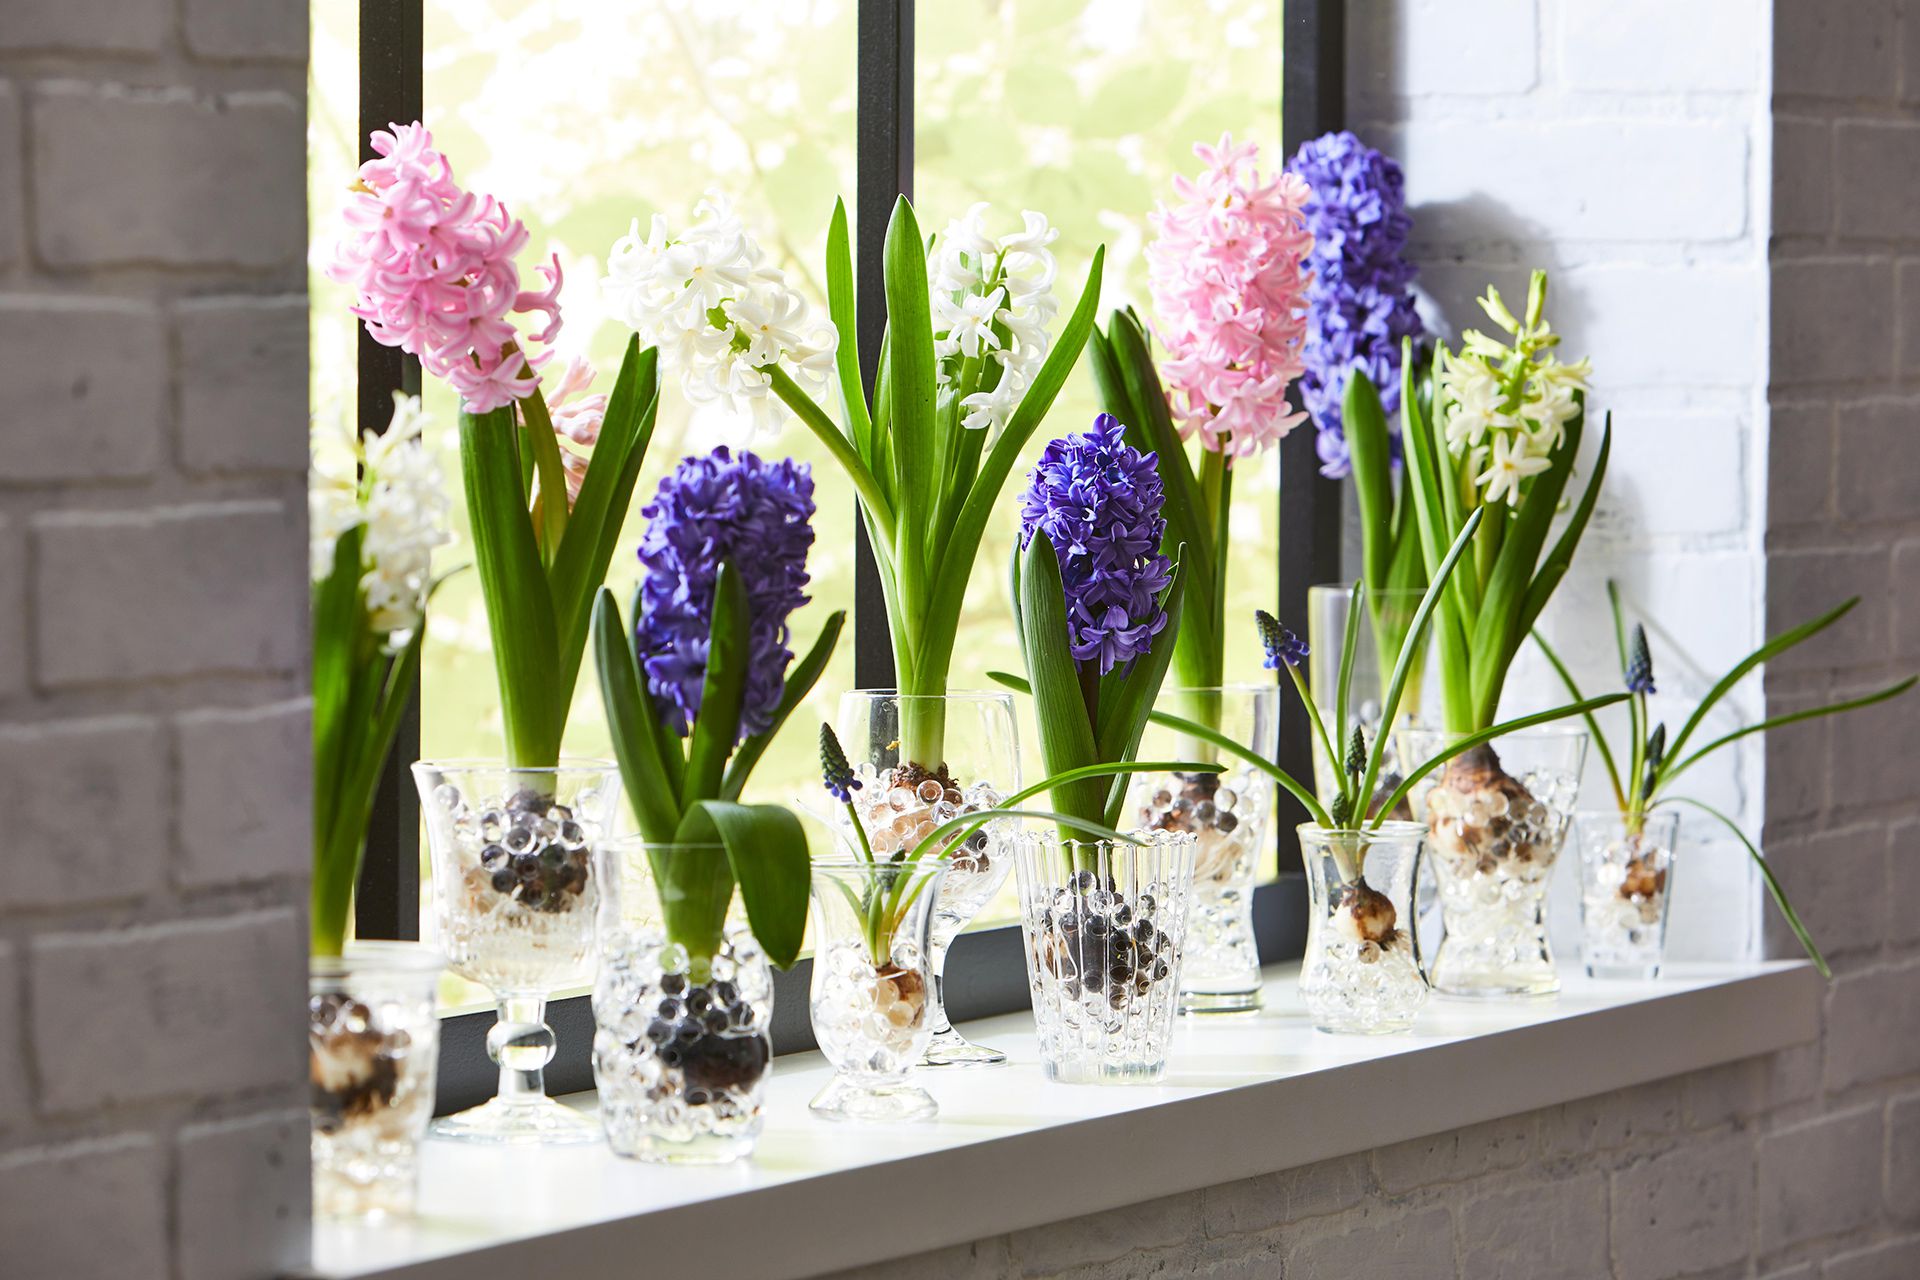 How To Store Hyacinth Bulbs After Flowering